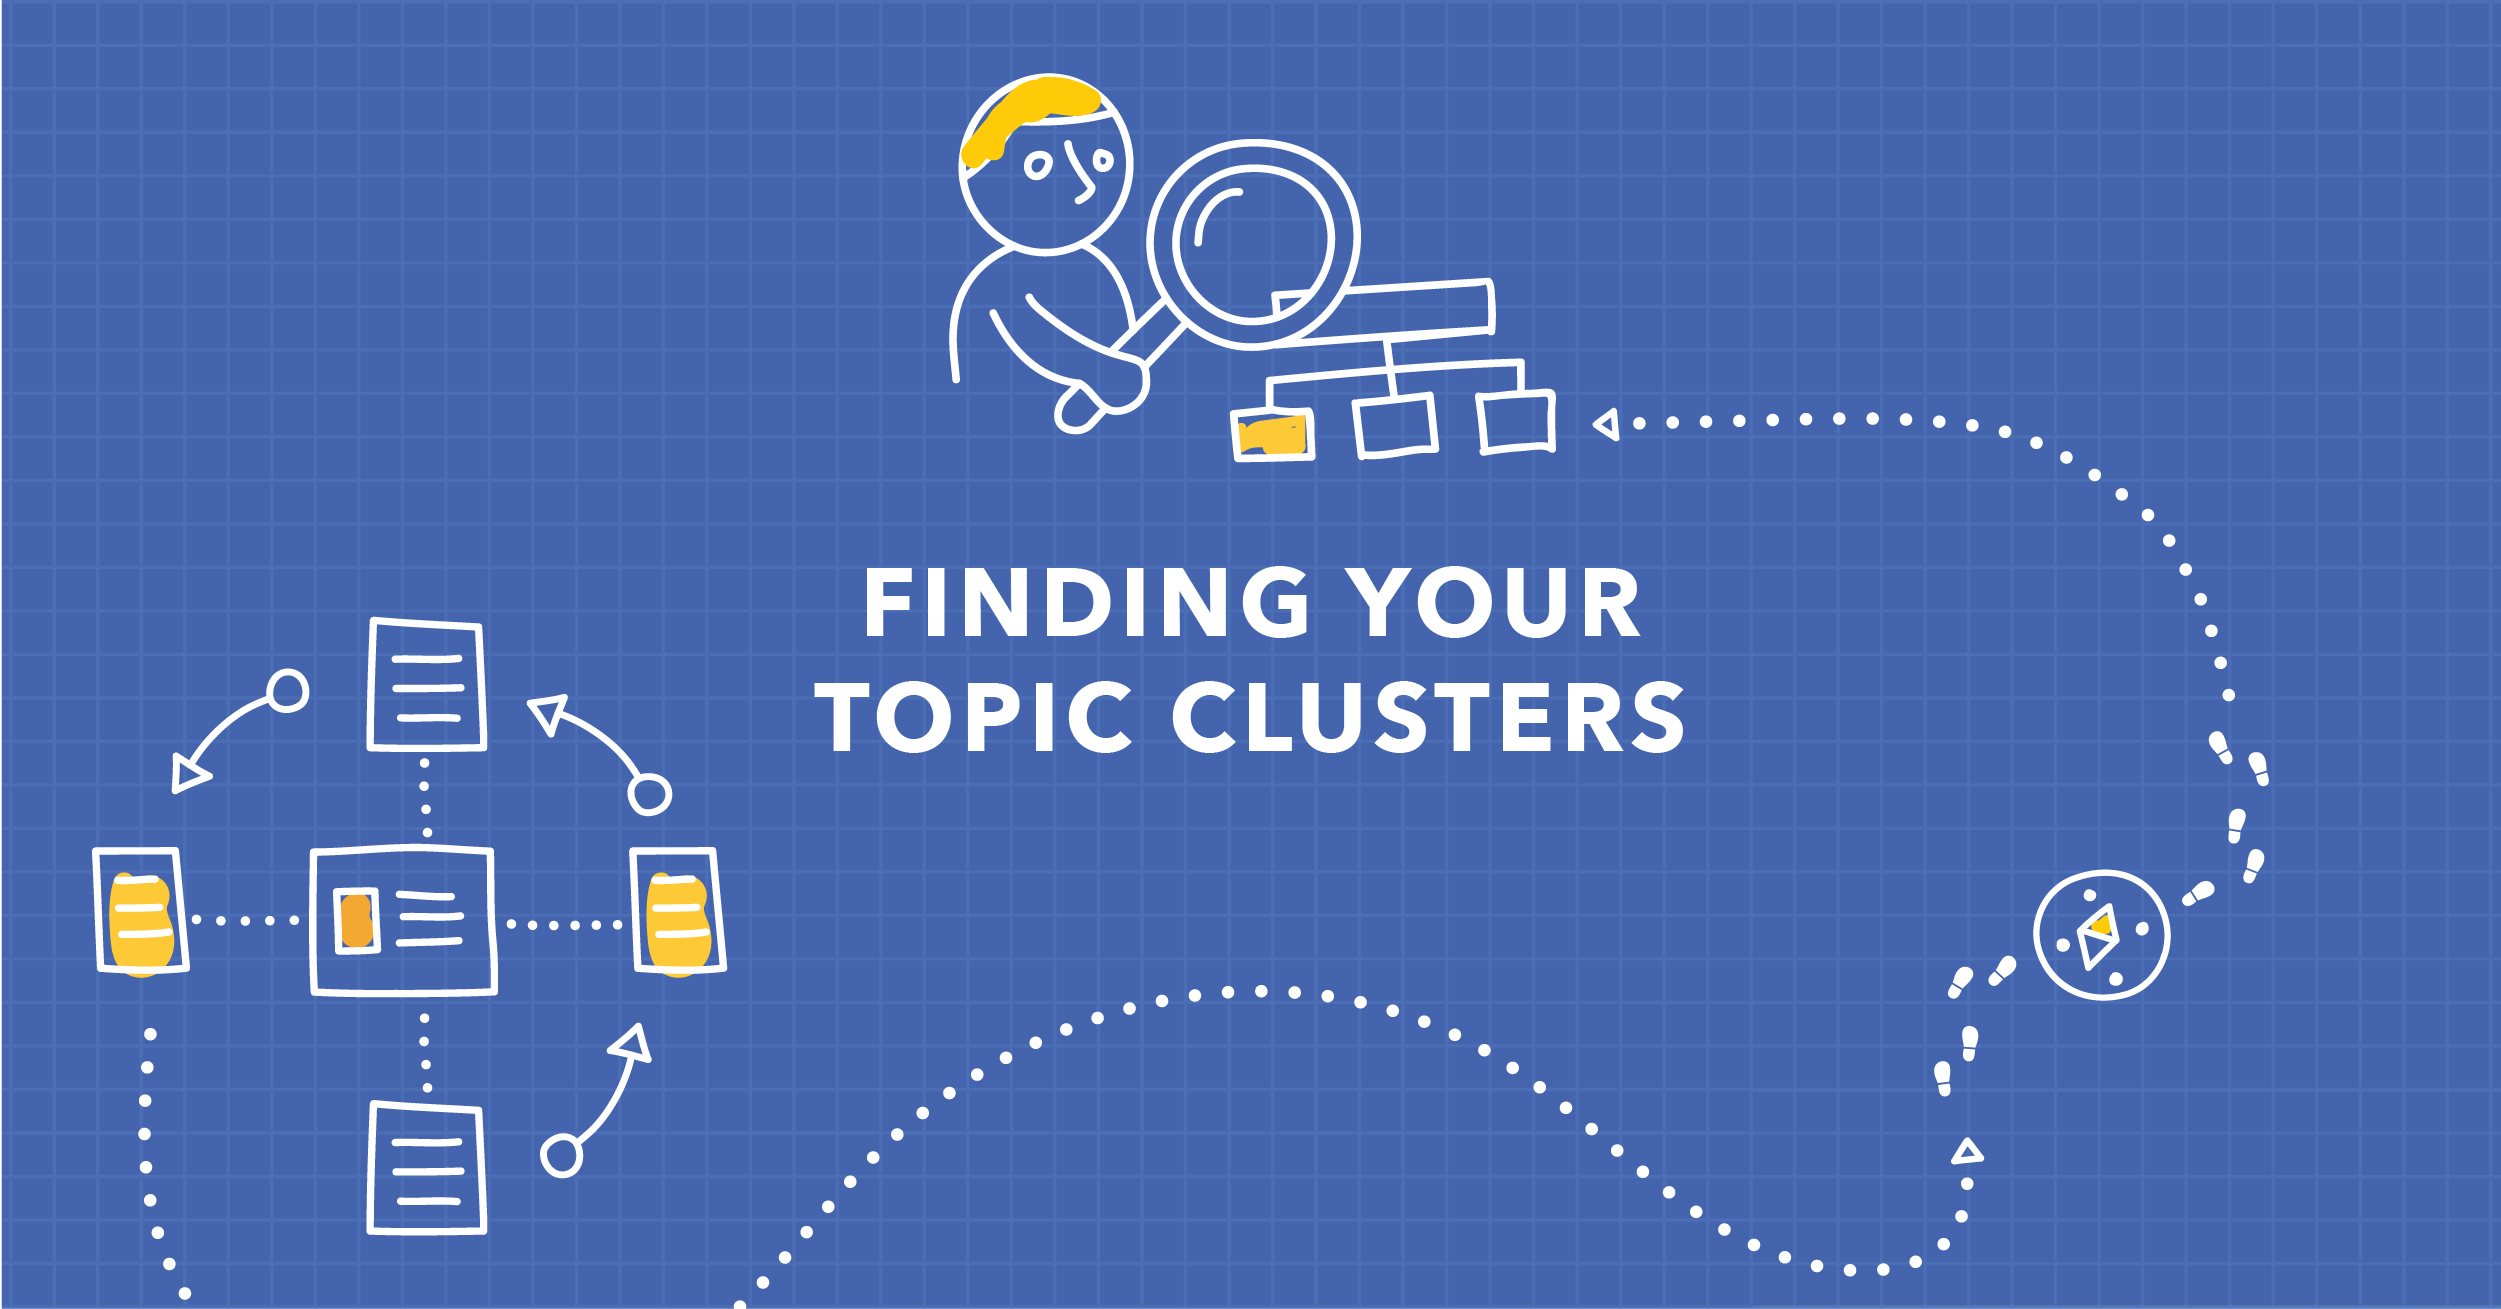 Build Content that Drives Authority with Topic Explorer, Our Topic Cluster Tool